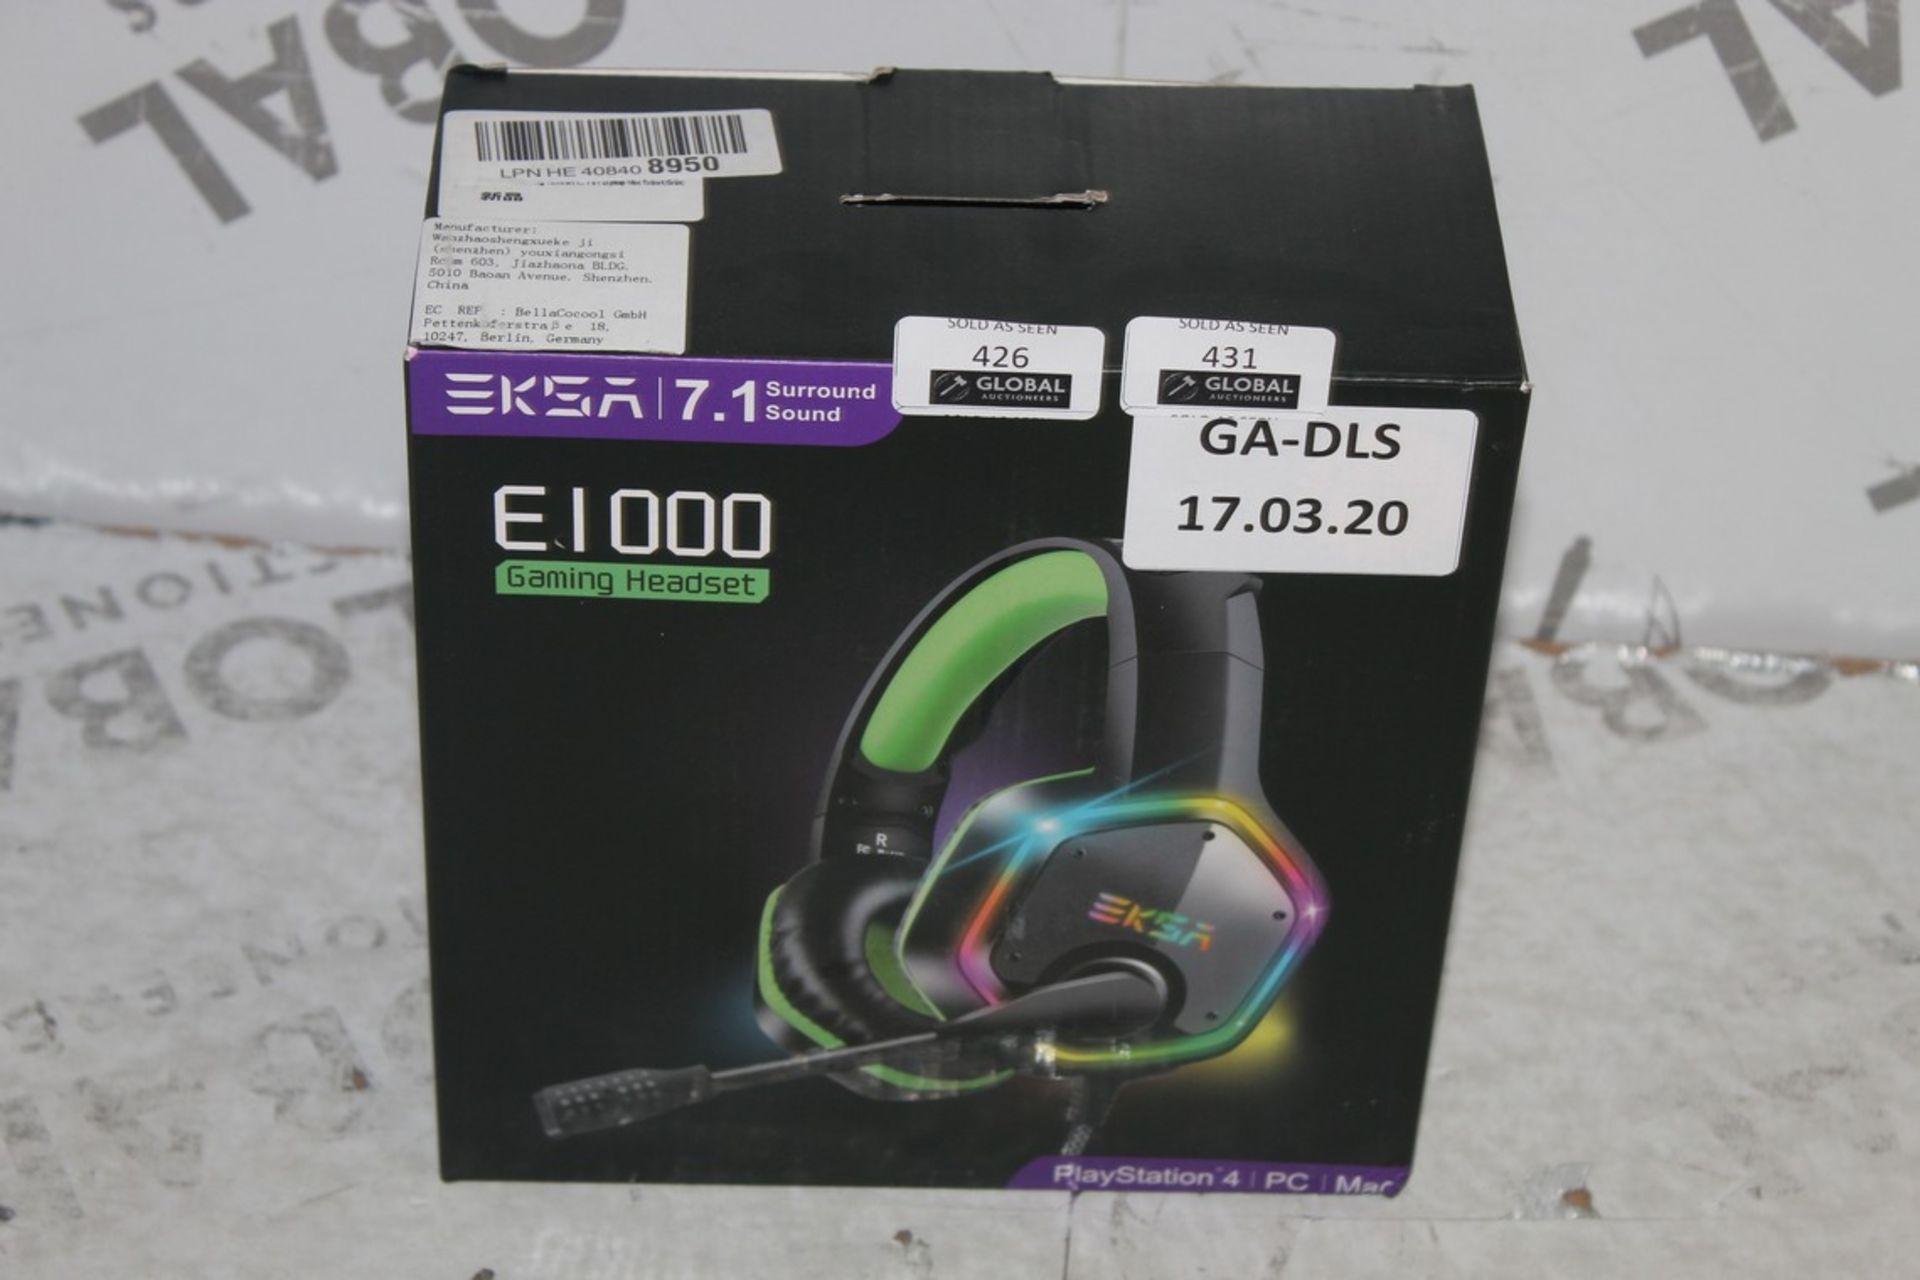 Boxed Pair Of EKSA E1000 Gaming Headphones And Microphone With 7.1 Channel Surround Sound In Black